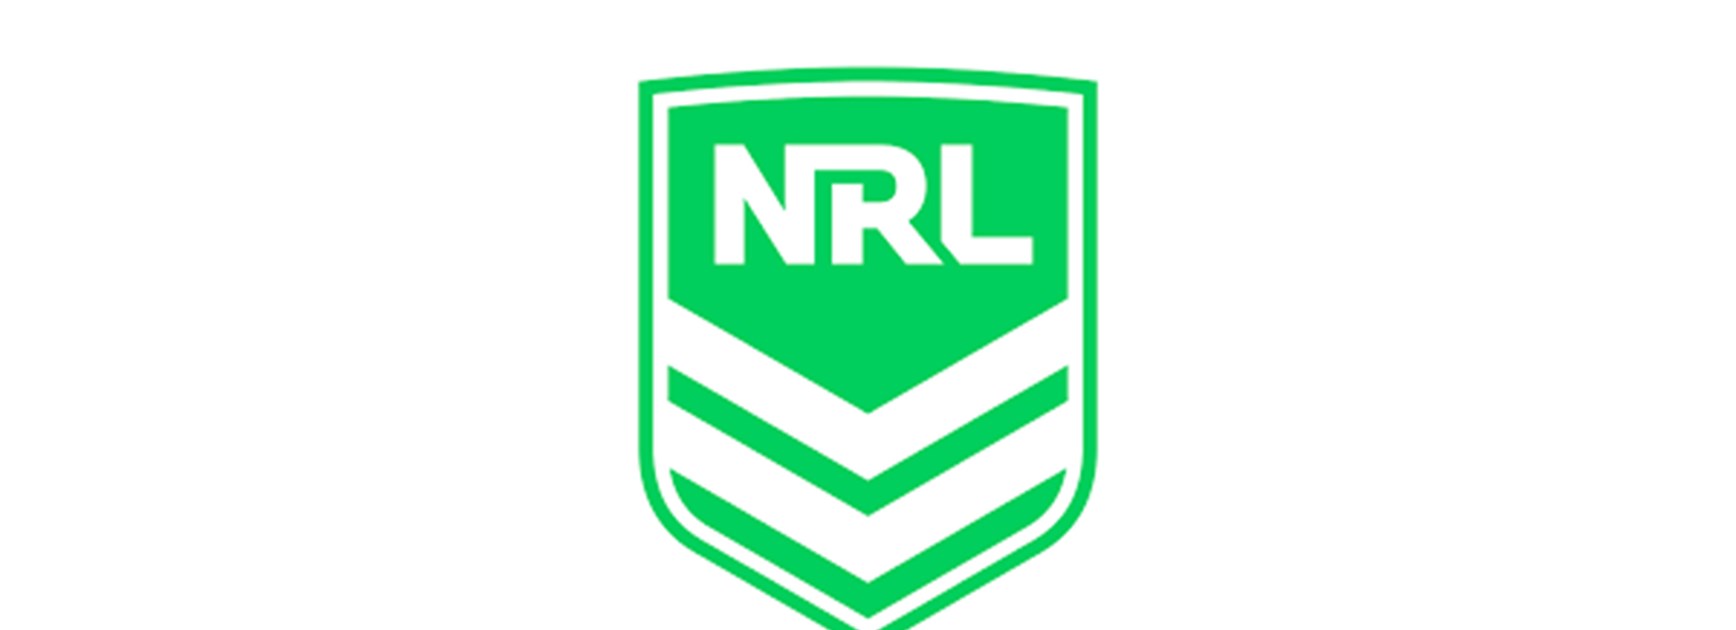 NRL Game Development Officer wanted - Canberra